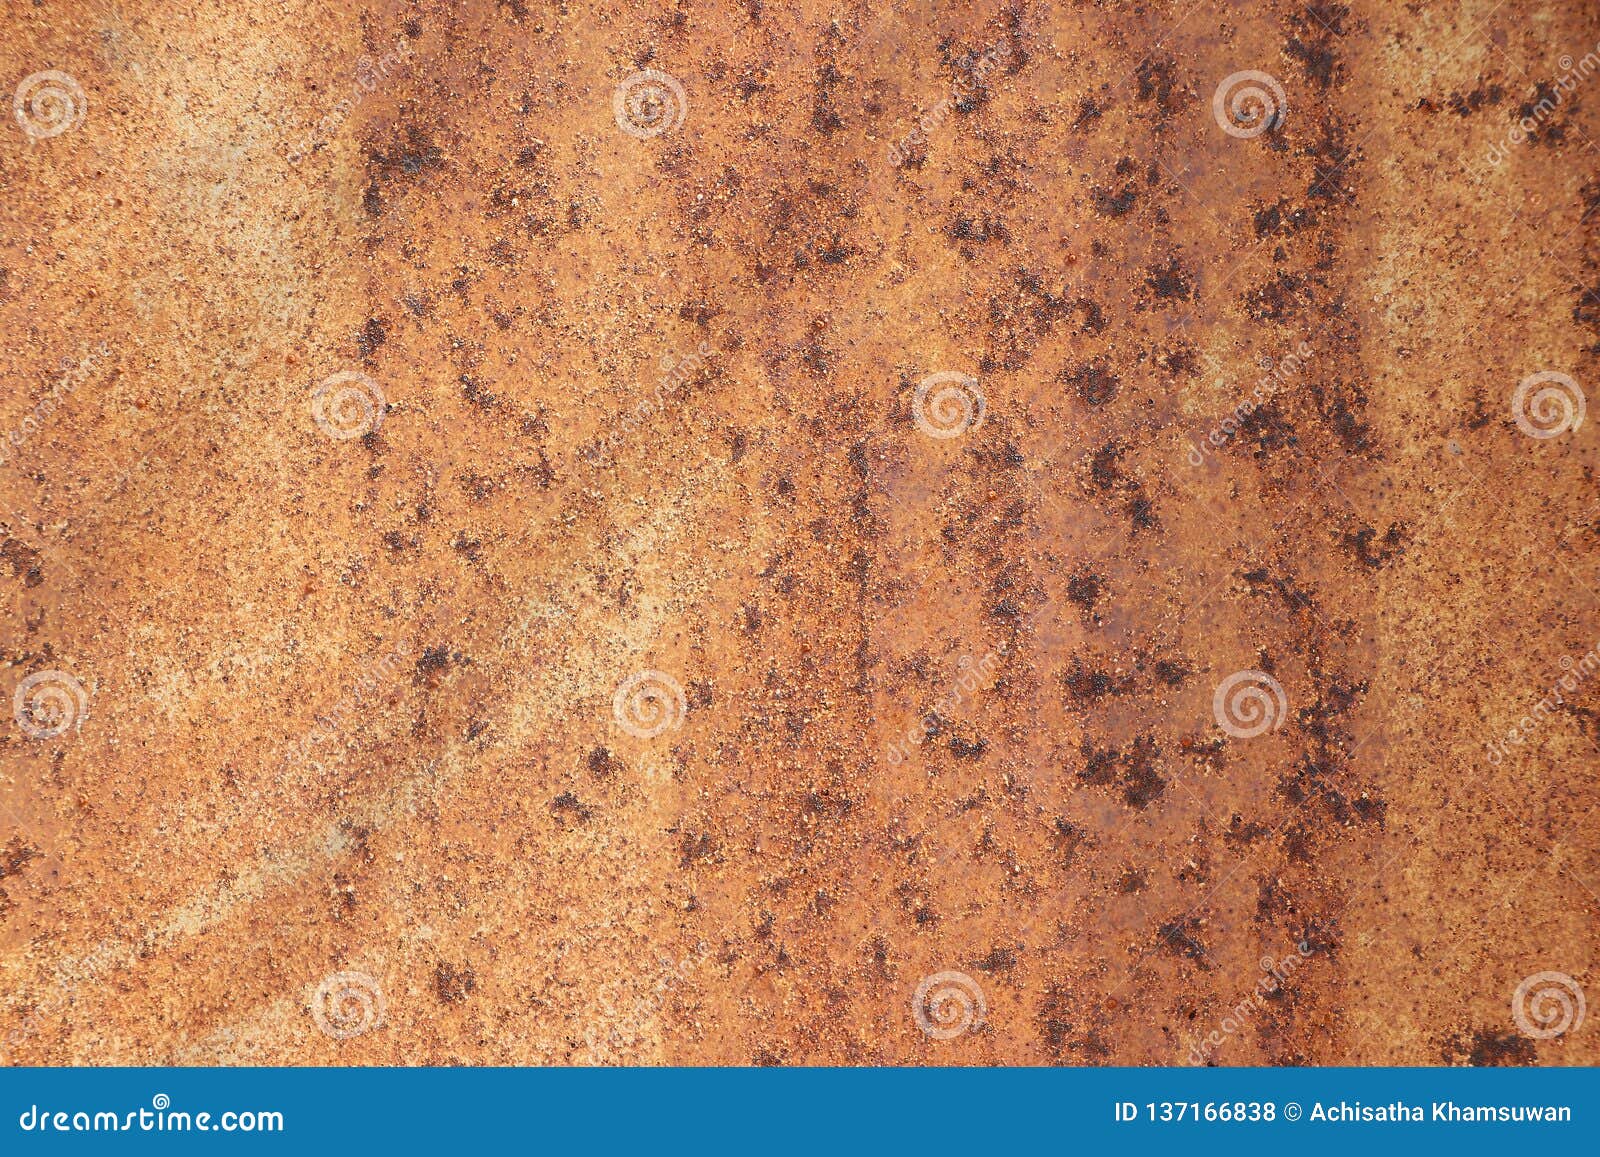 Rusty Metal Wall, Old Sheet Of Steel Covered With Rust And Corrosion Paint Stock Photo Image